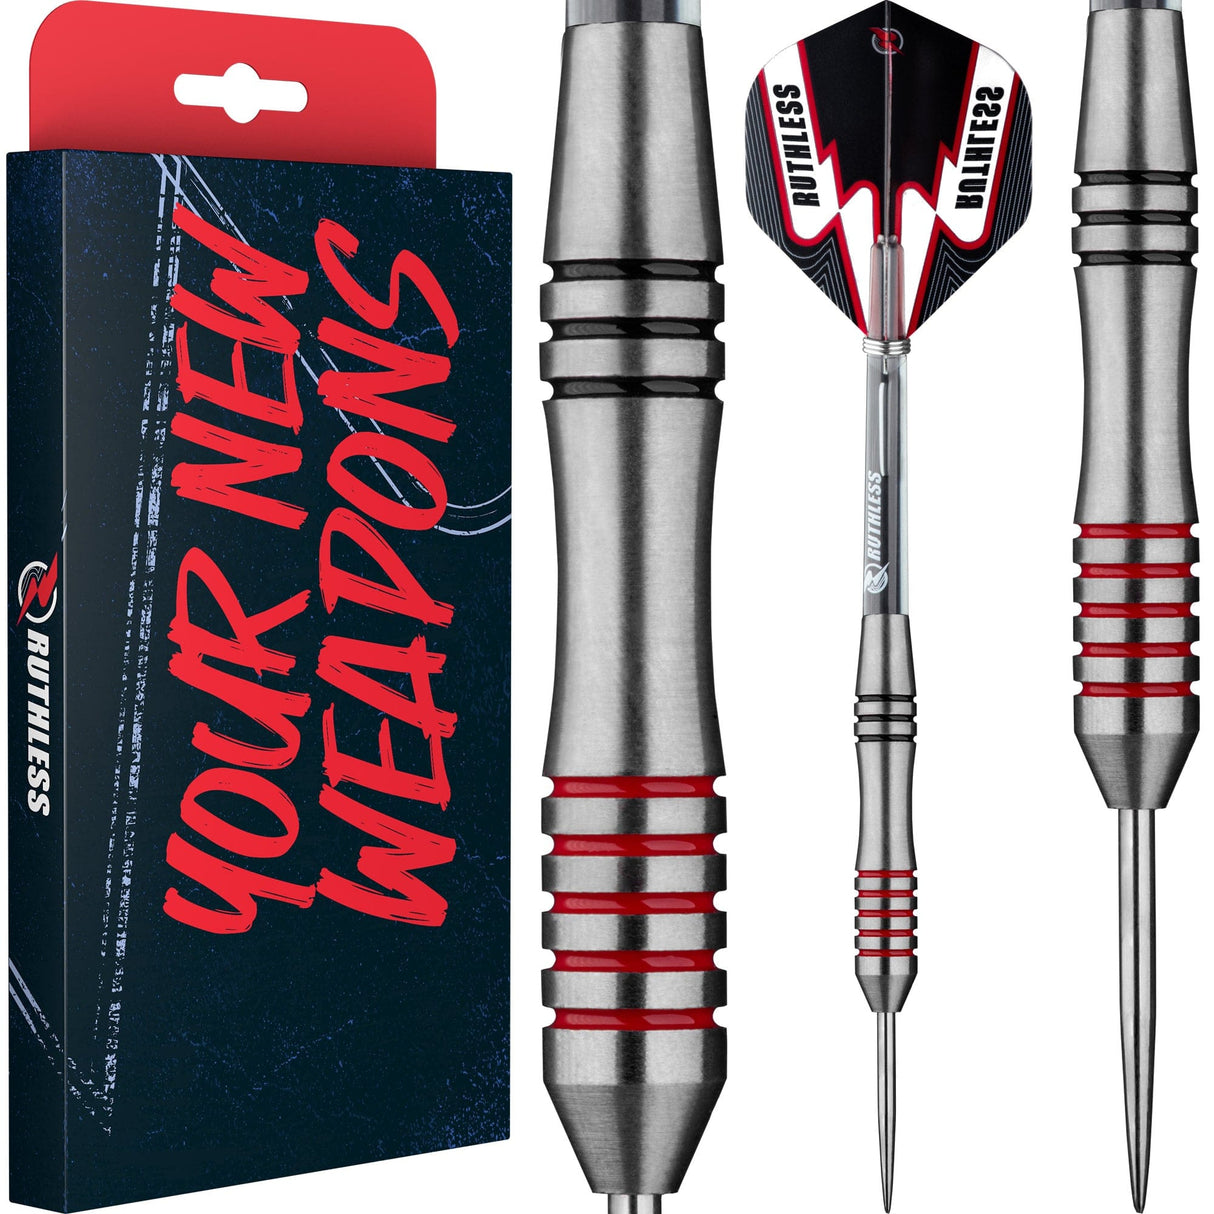 Ruthless Scallop Darts - Steel Tip - Twin Ring - Black & Red - 28g 28g